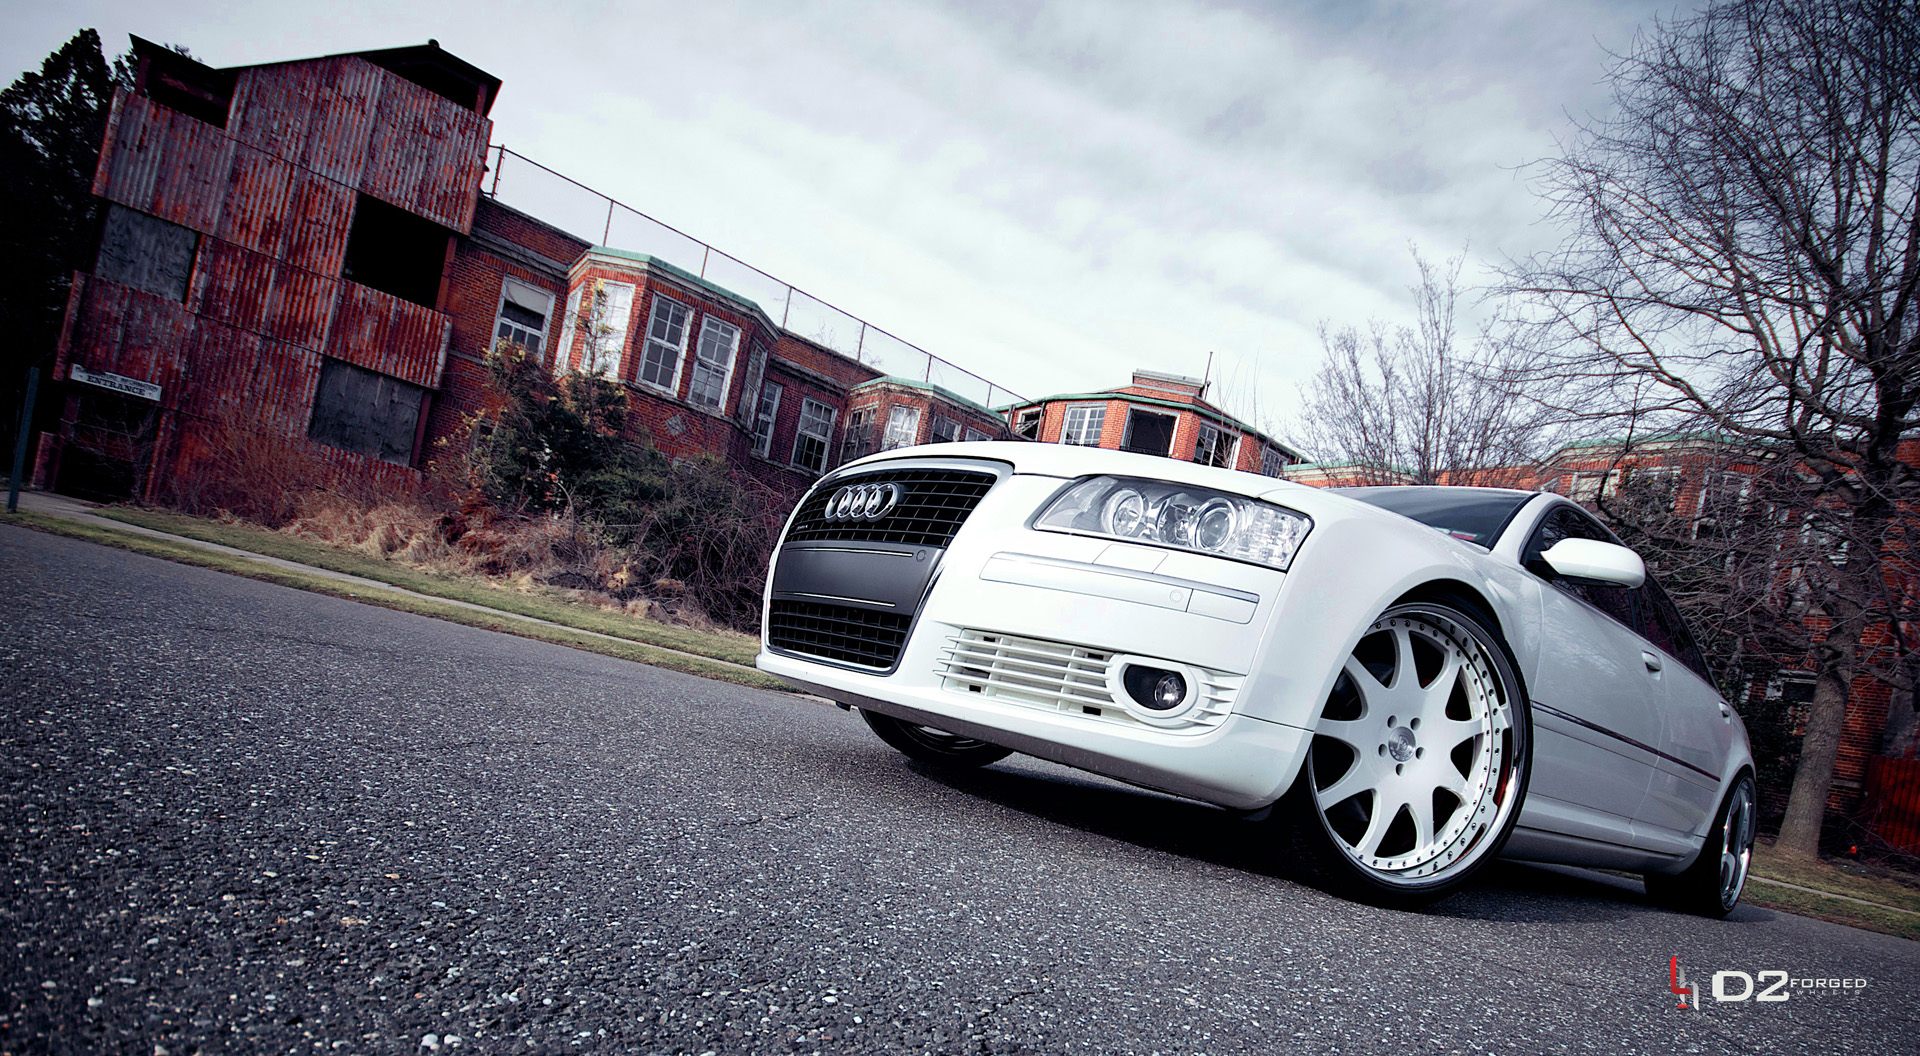 D2Forged Audi A8 VS7